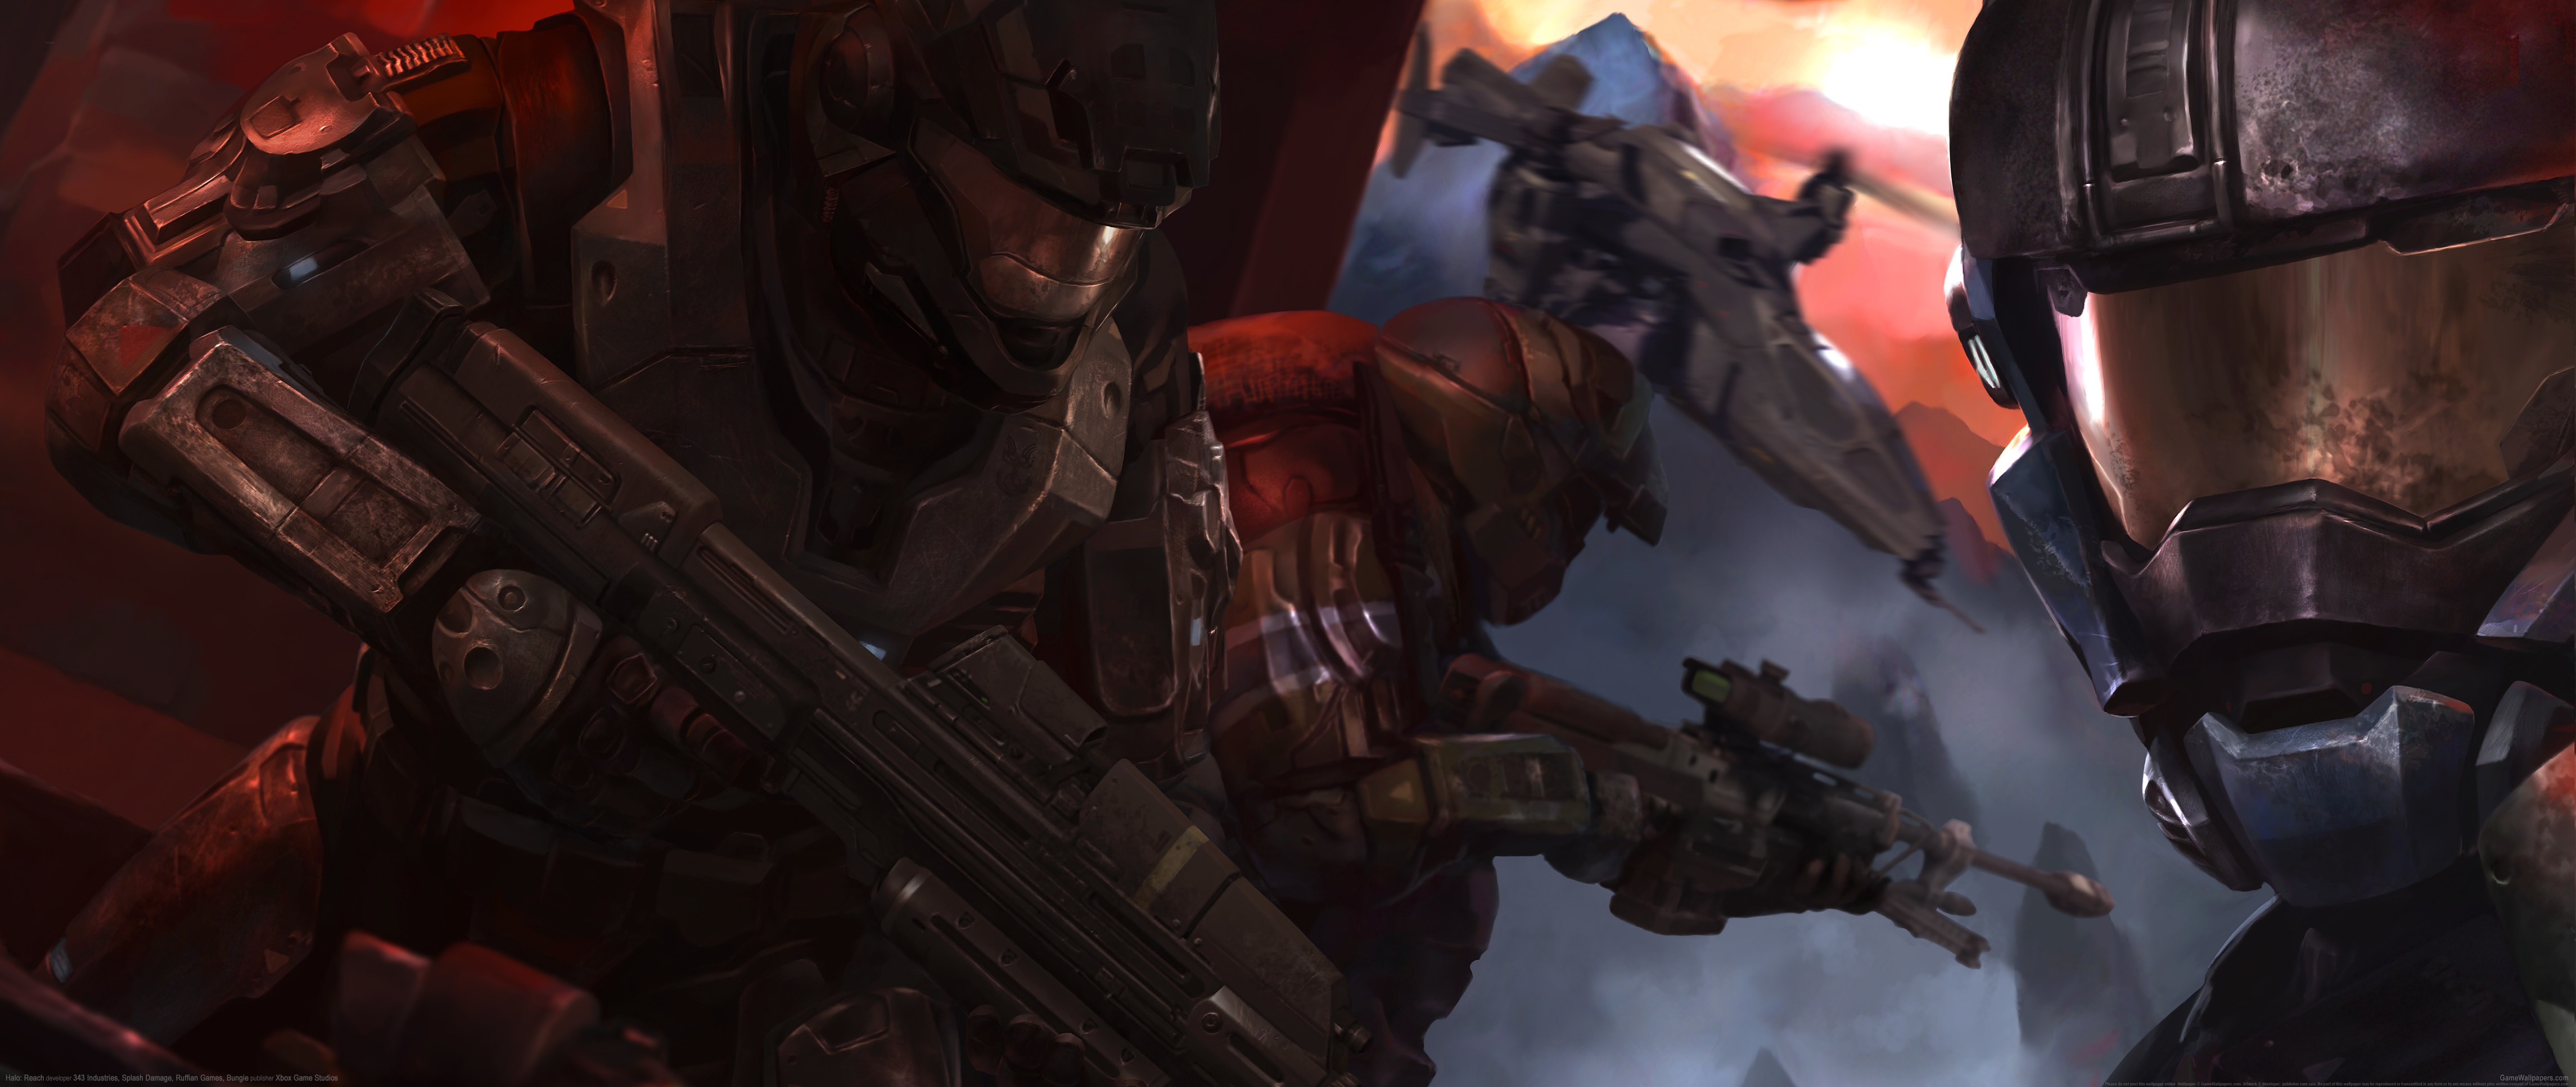 Halo: Reach 5120x2160 wallpaper or background 09